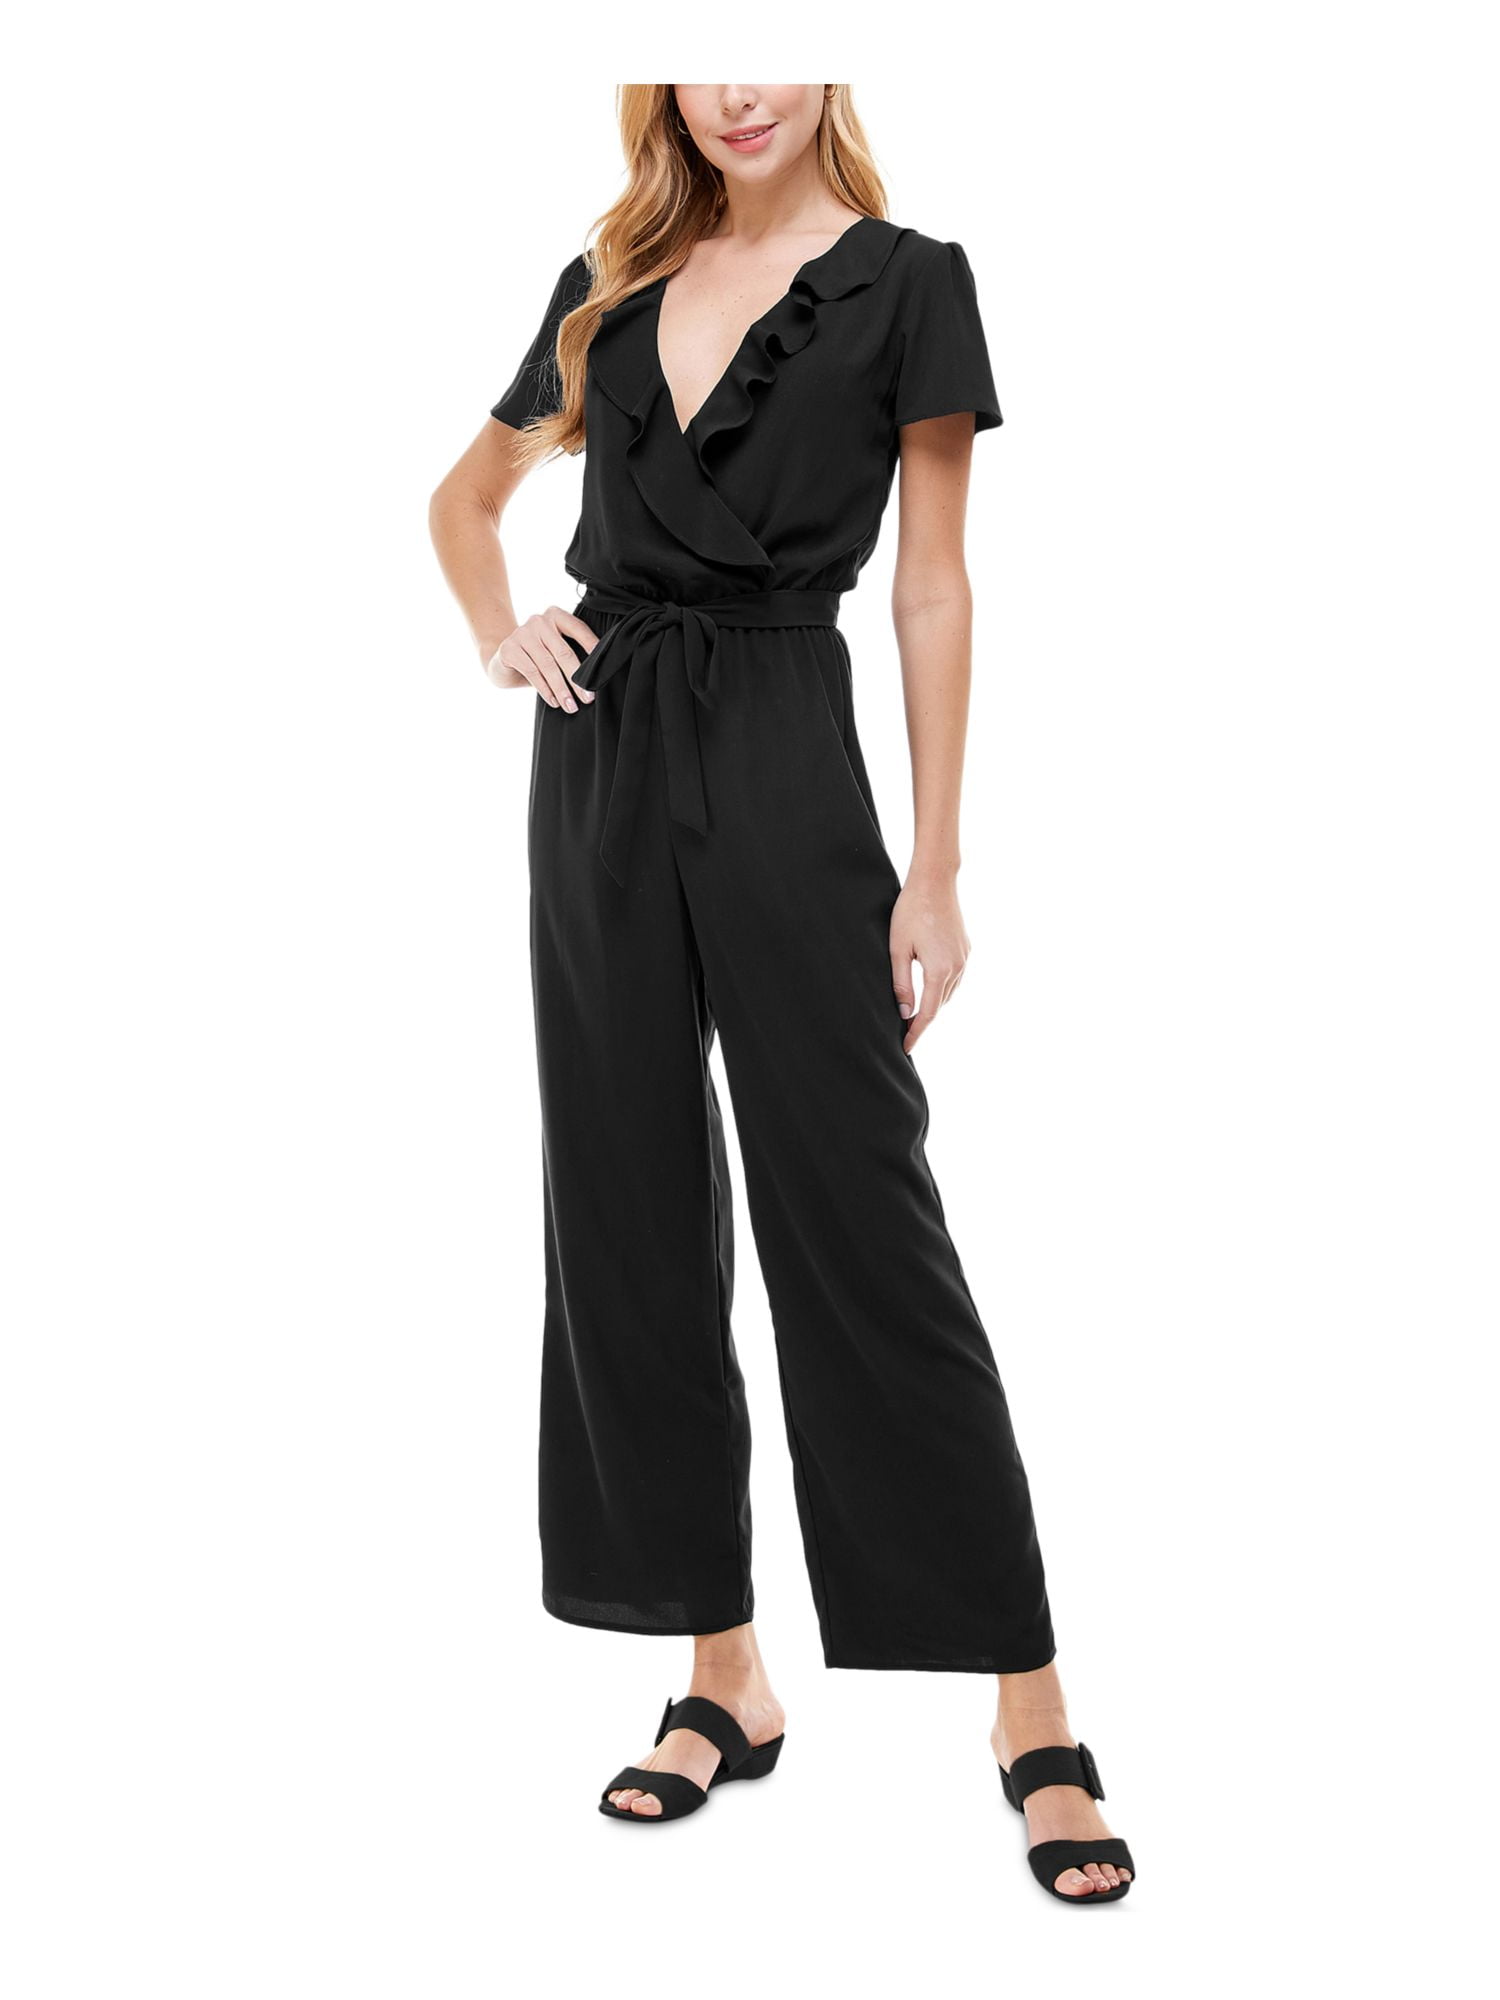 Posijego Womens Button Up Long Sleeve Jumpsuit Oversized Loose Tie